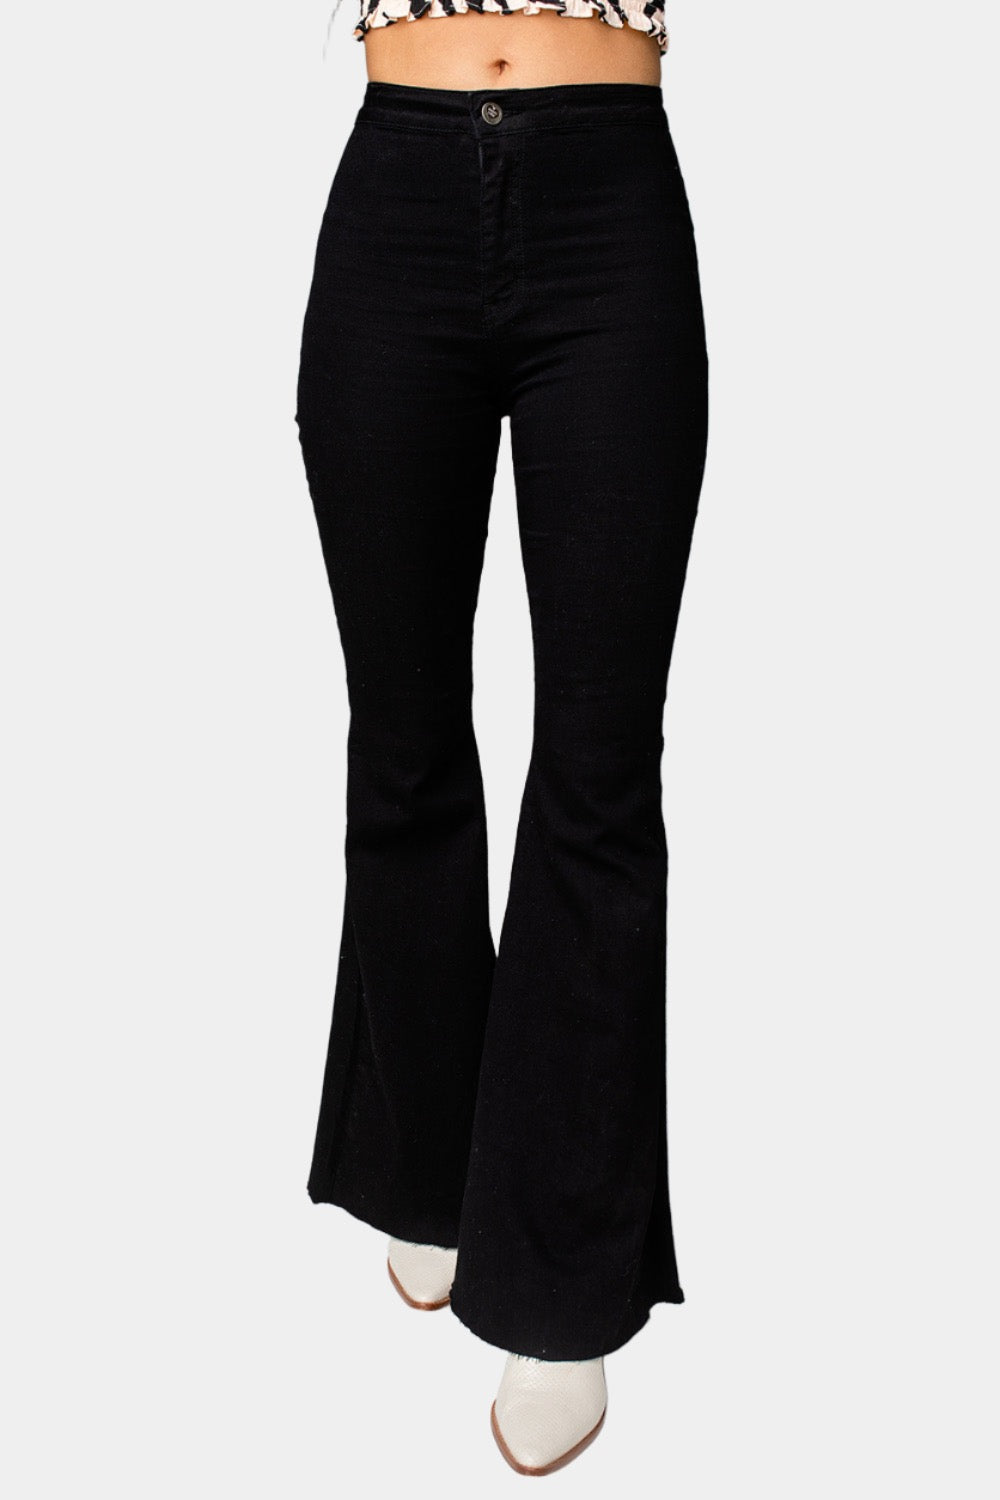 All About It Flare Pants